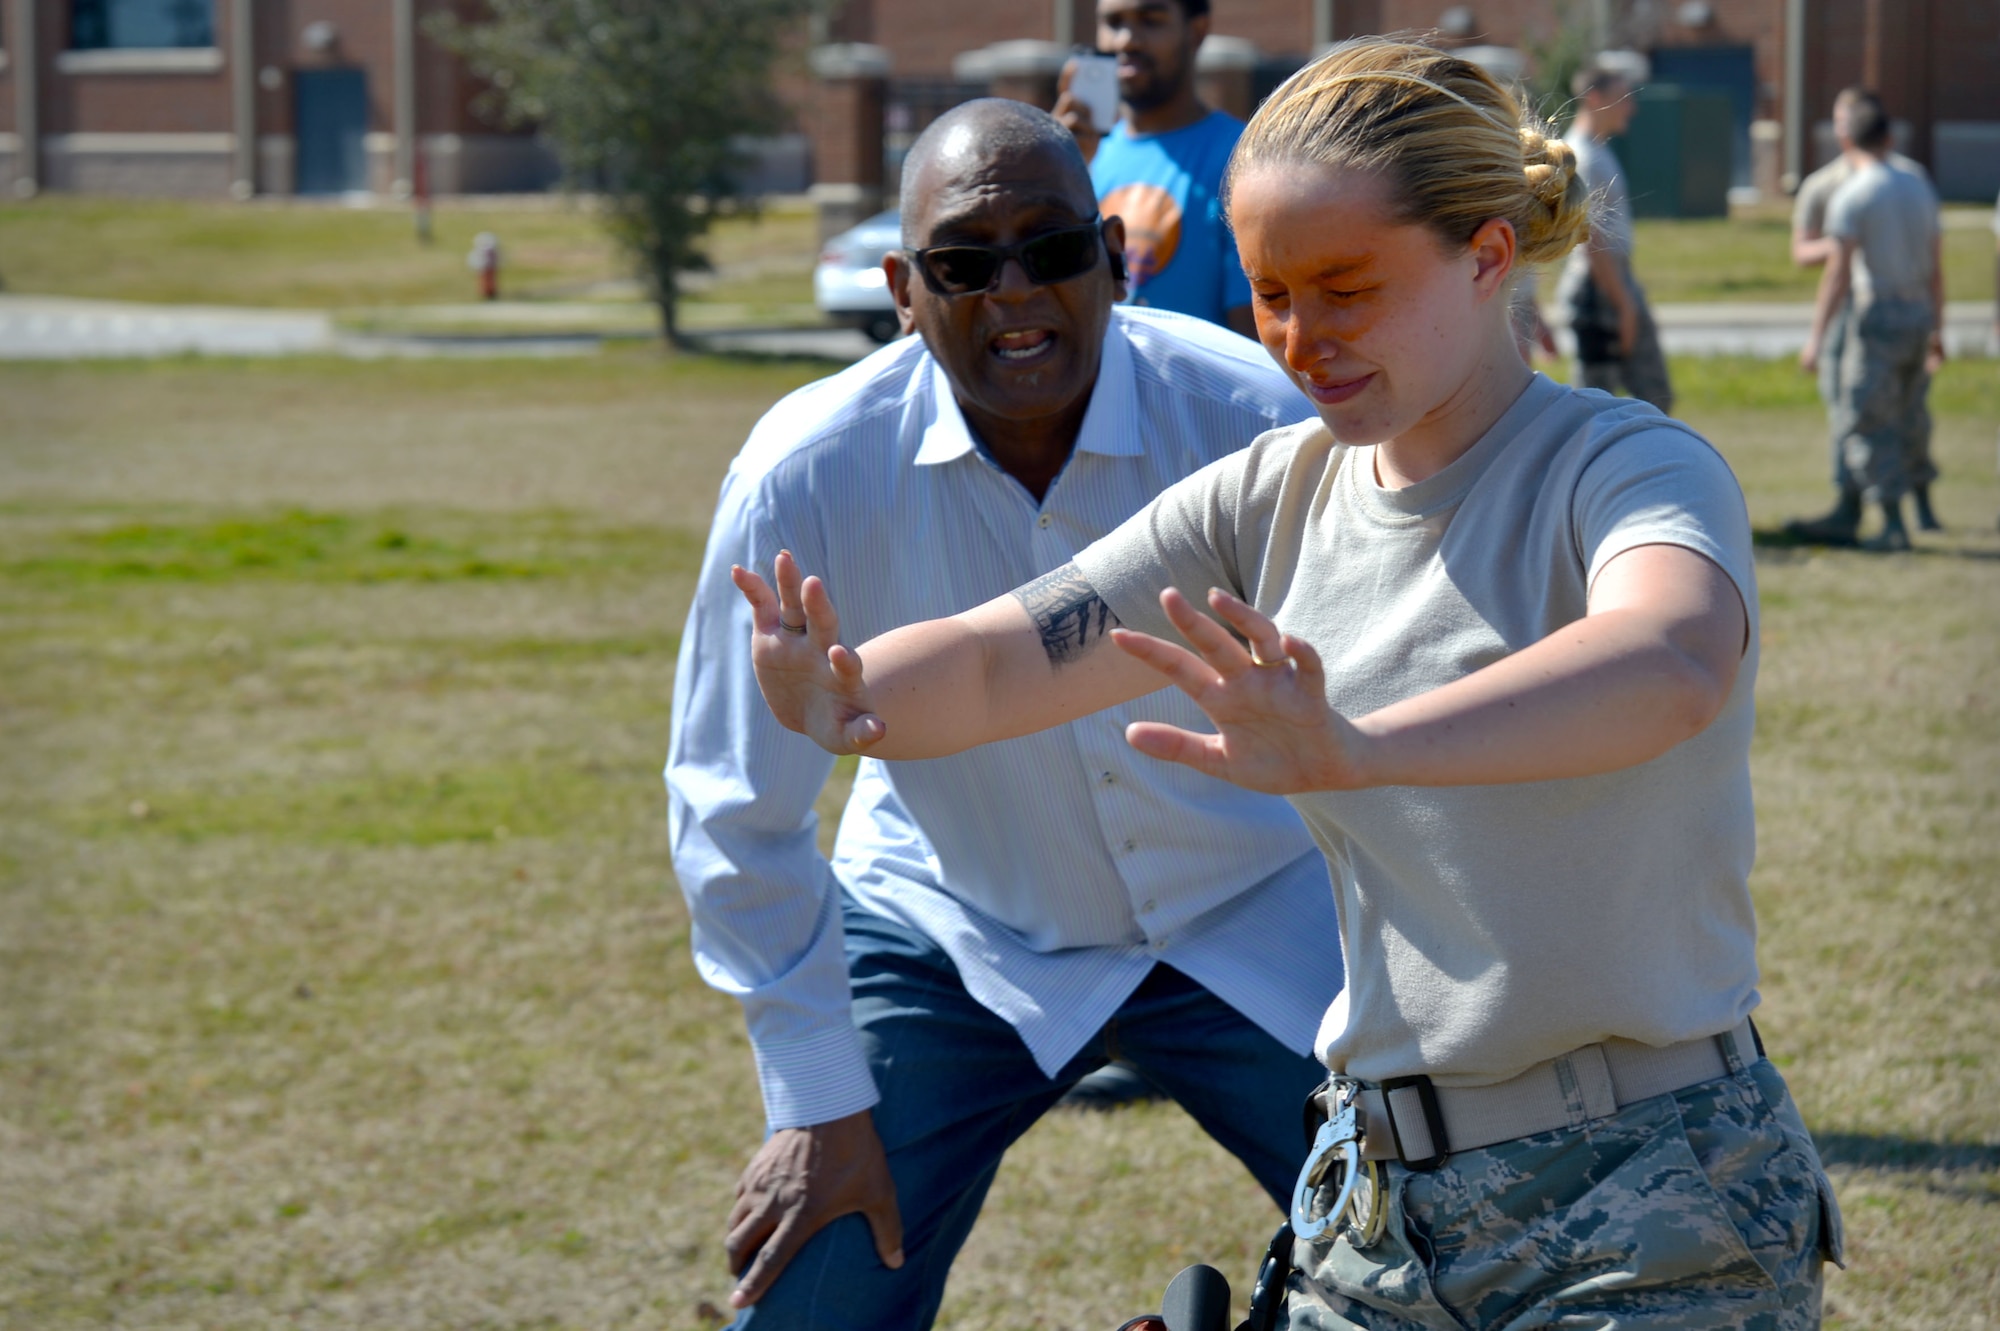 U.S Air Force Airman 1st Class Hannah McCoy, 20th Security Forces Squadron entry controller, attempts to find the next section of the pepper spray training course at Shaw Air Force Base, S.C., Feb. 29, 2016. The pepper spray training tests the Airmen to see how they would react in the event they get pepper sprayed while performing entry control duties. (U.S. Air Force photo by Senior Airman Michael Cossaboom)